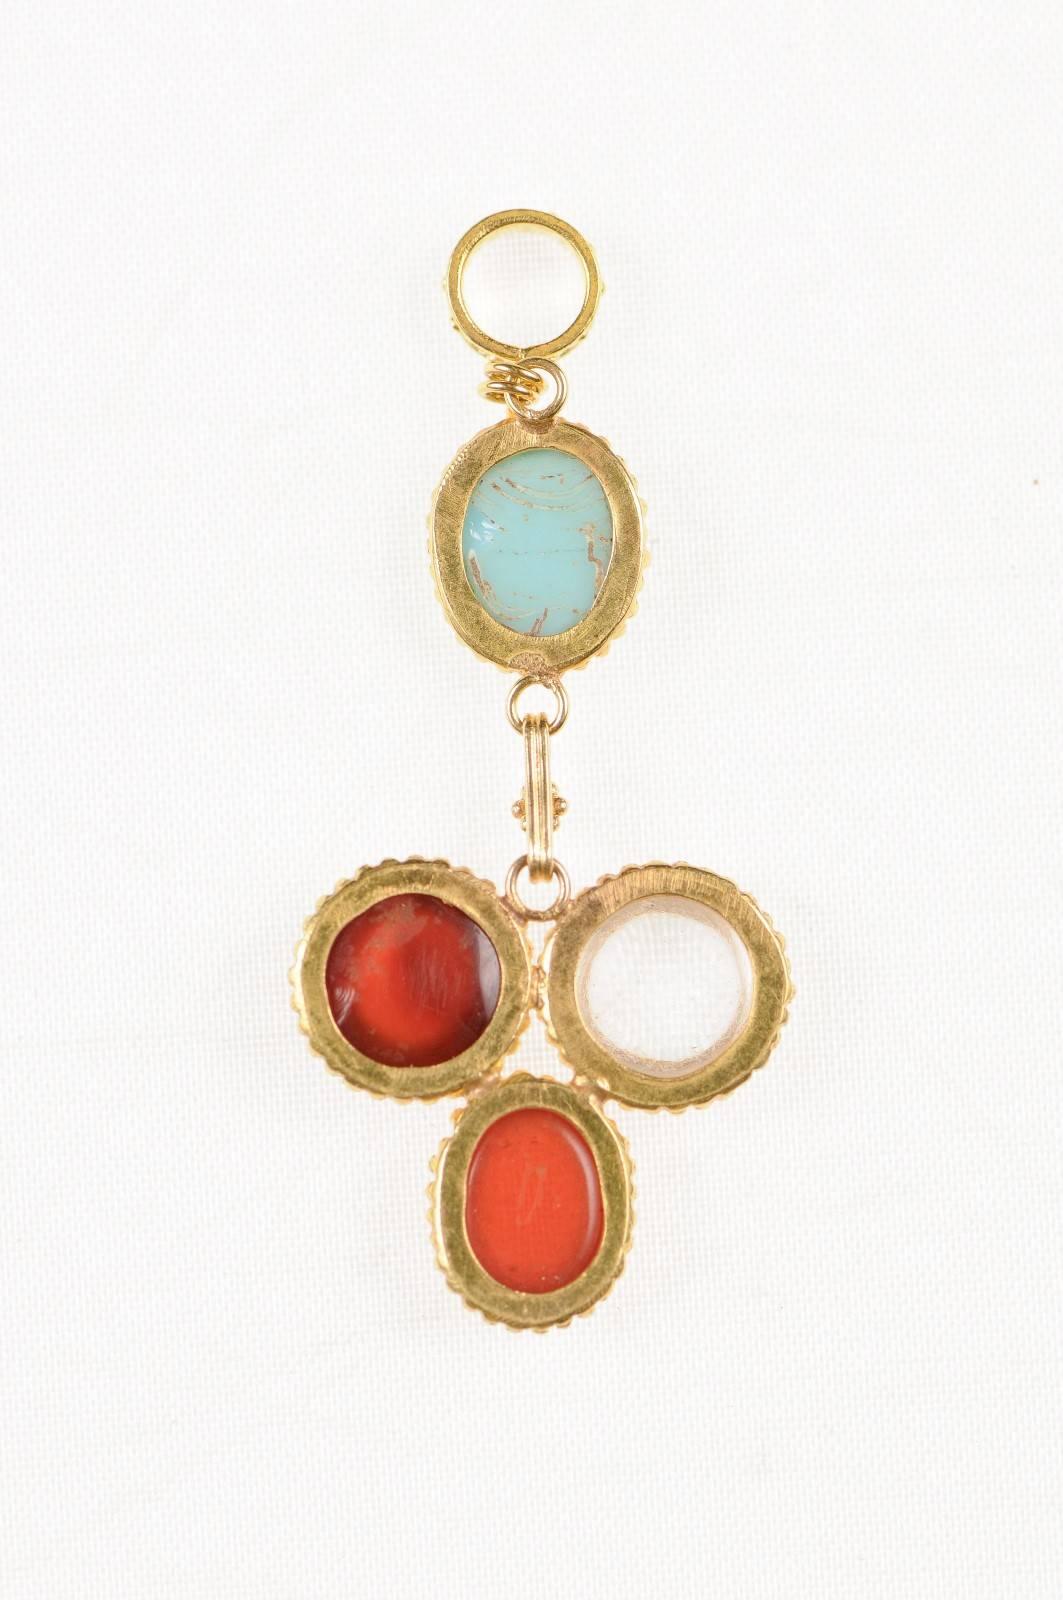 Lovely Multicolored Drop Necklace Pendant of Old Roman Glass '400 AD-500 AD' For Sale 2